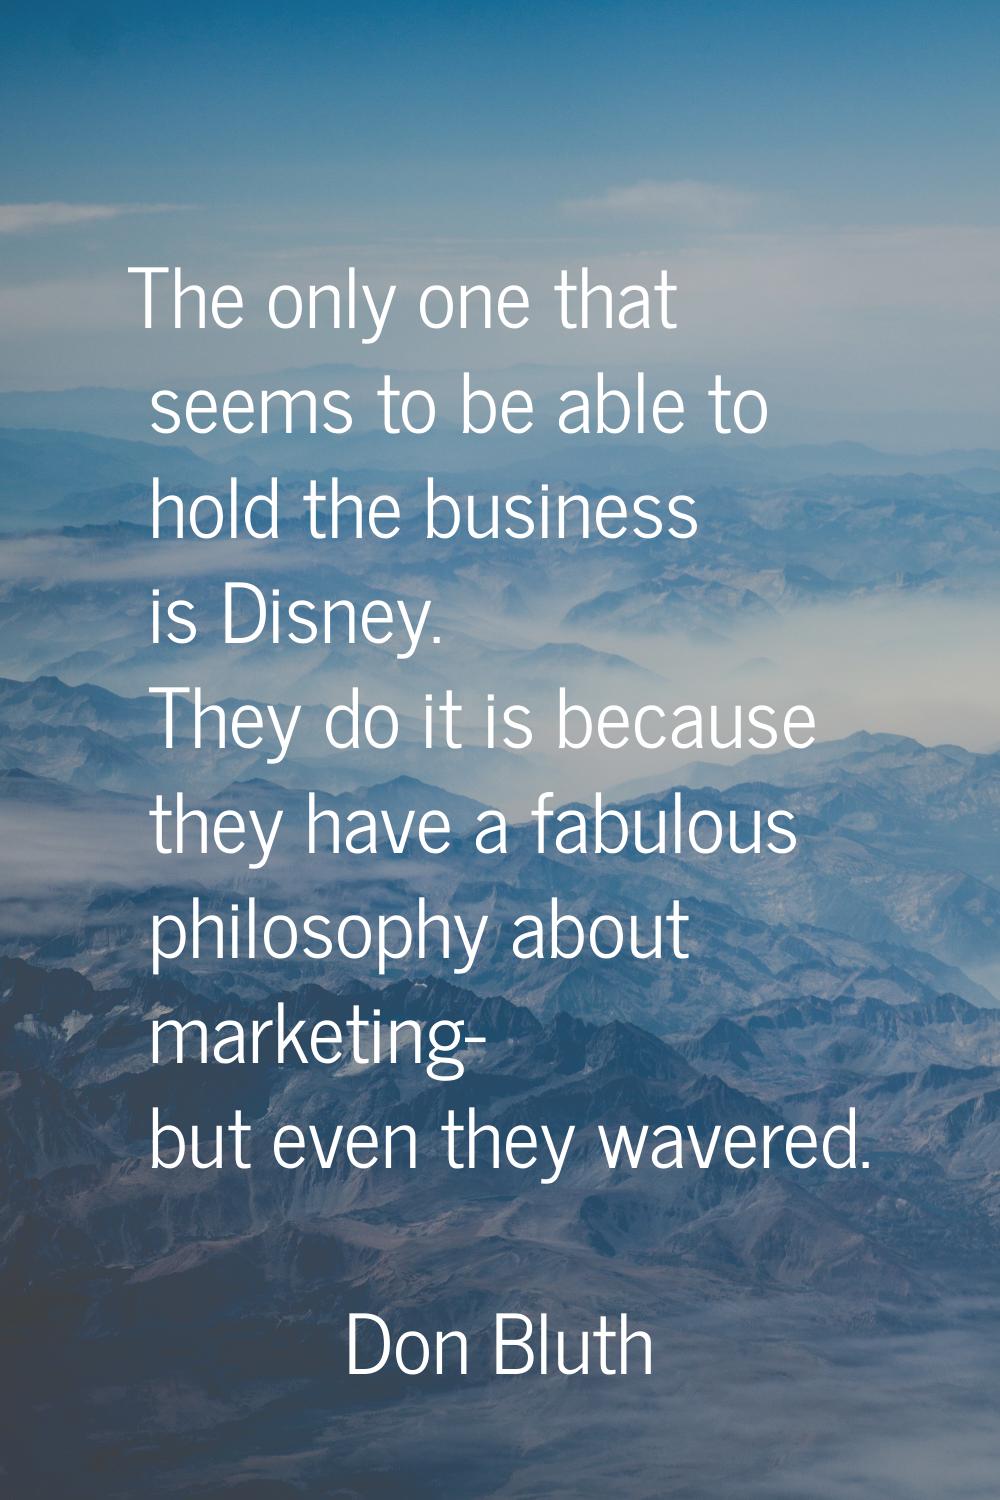 The only one that seems to be able to hold the business is Disney. They do it is because they have 